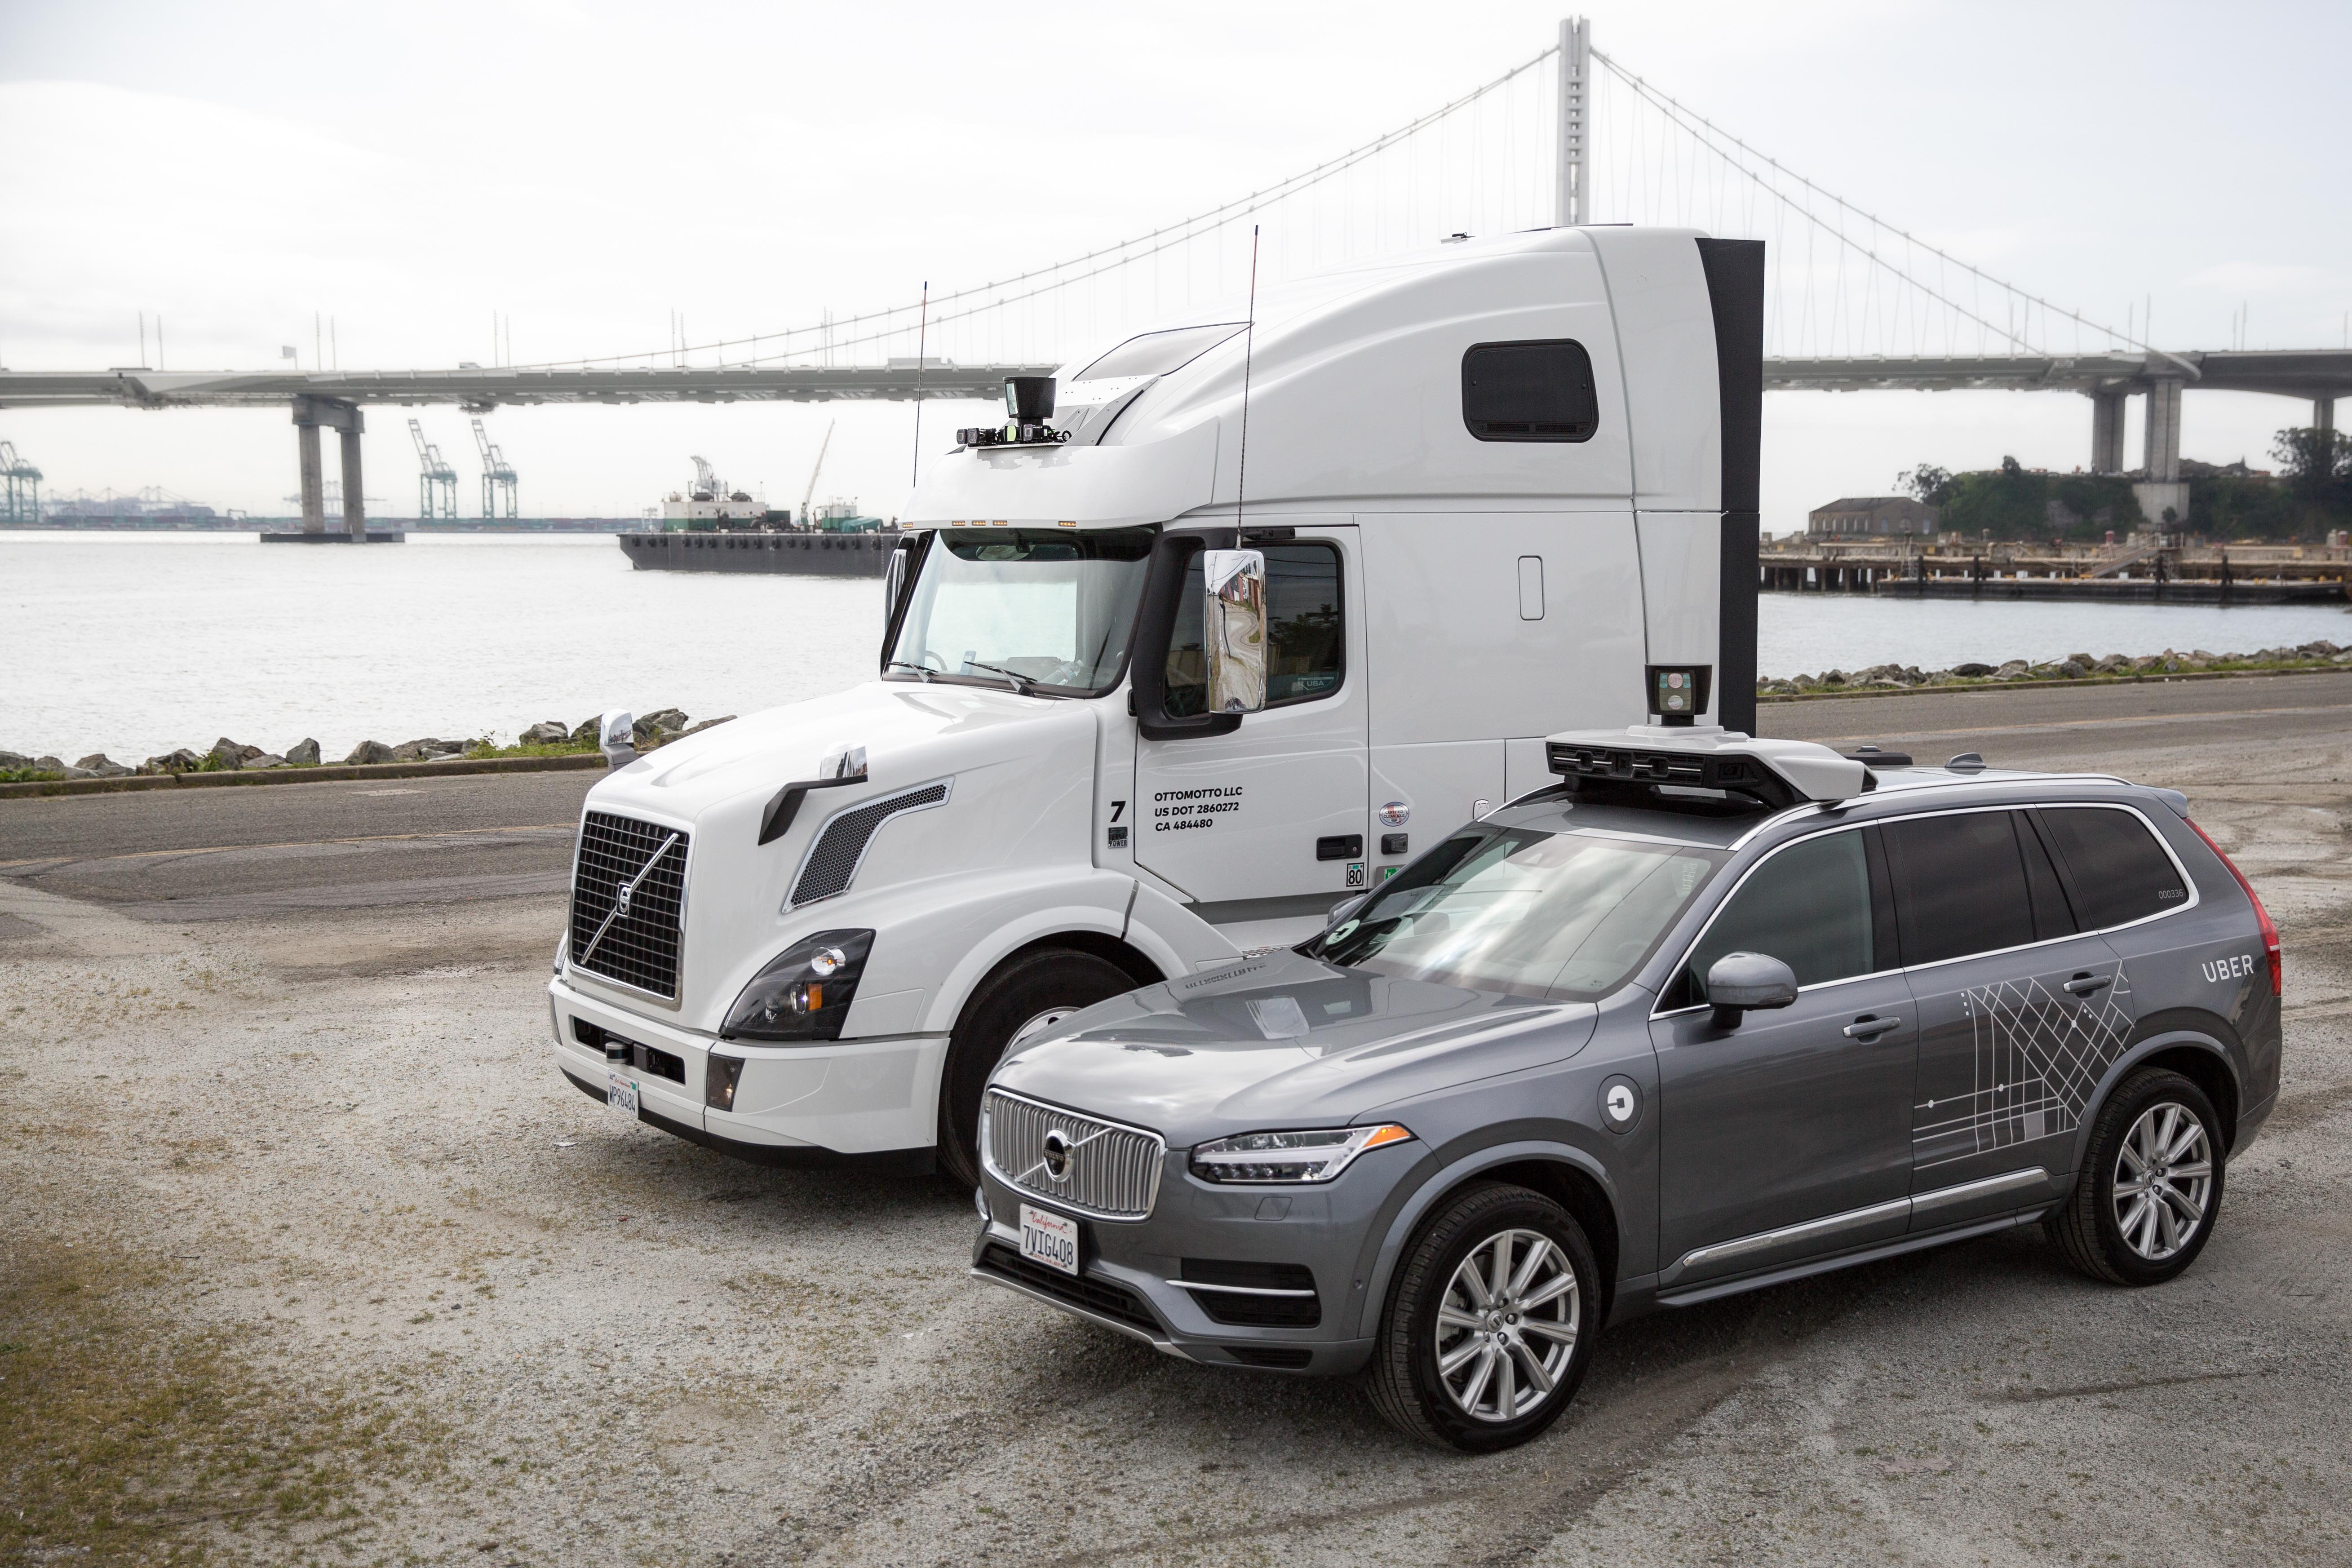 Uber Selects NVIDIA Technology to Power Its Self-Driving Fleets - IEEE Connected Vehicles